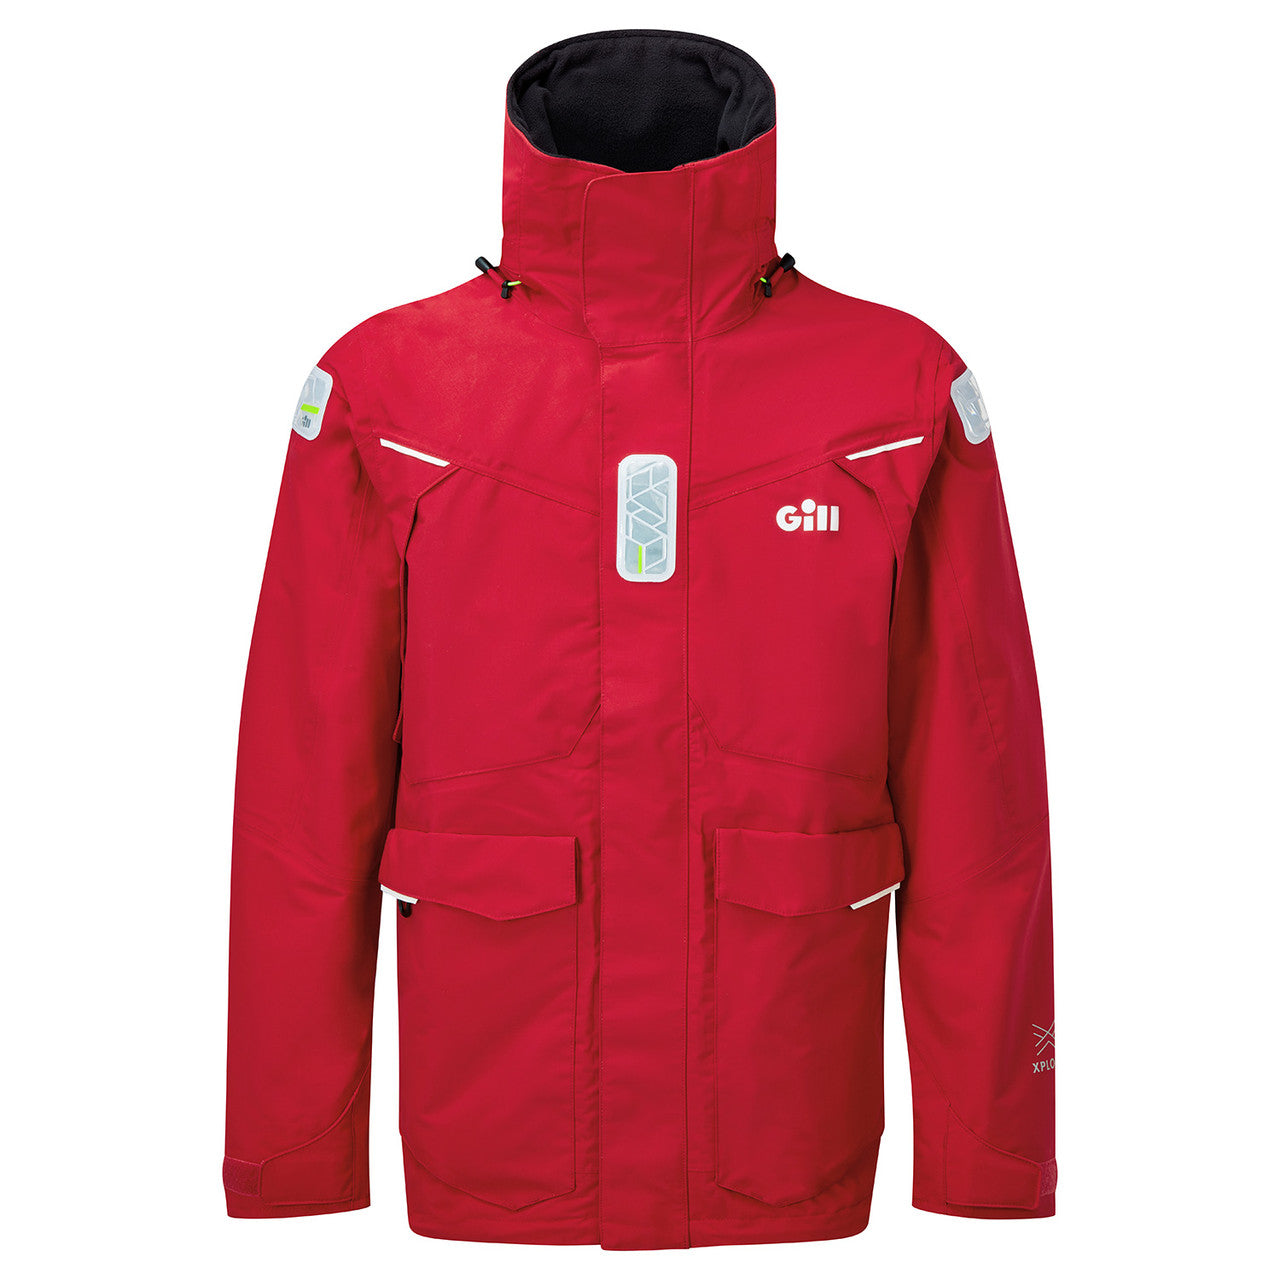 GILL OS2 Offshore Men's Jacket from GILL - CHAOS Fishing